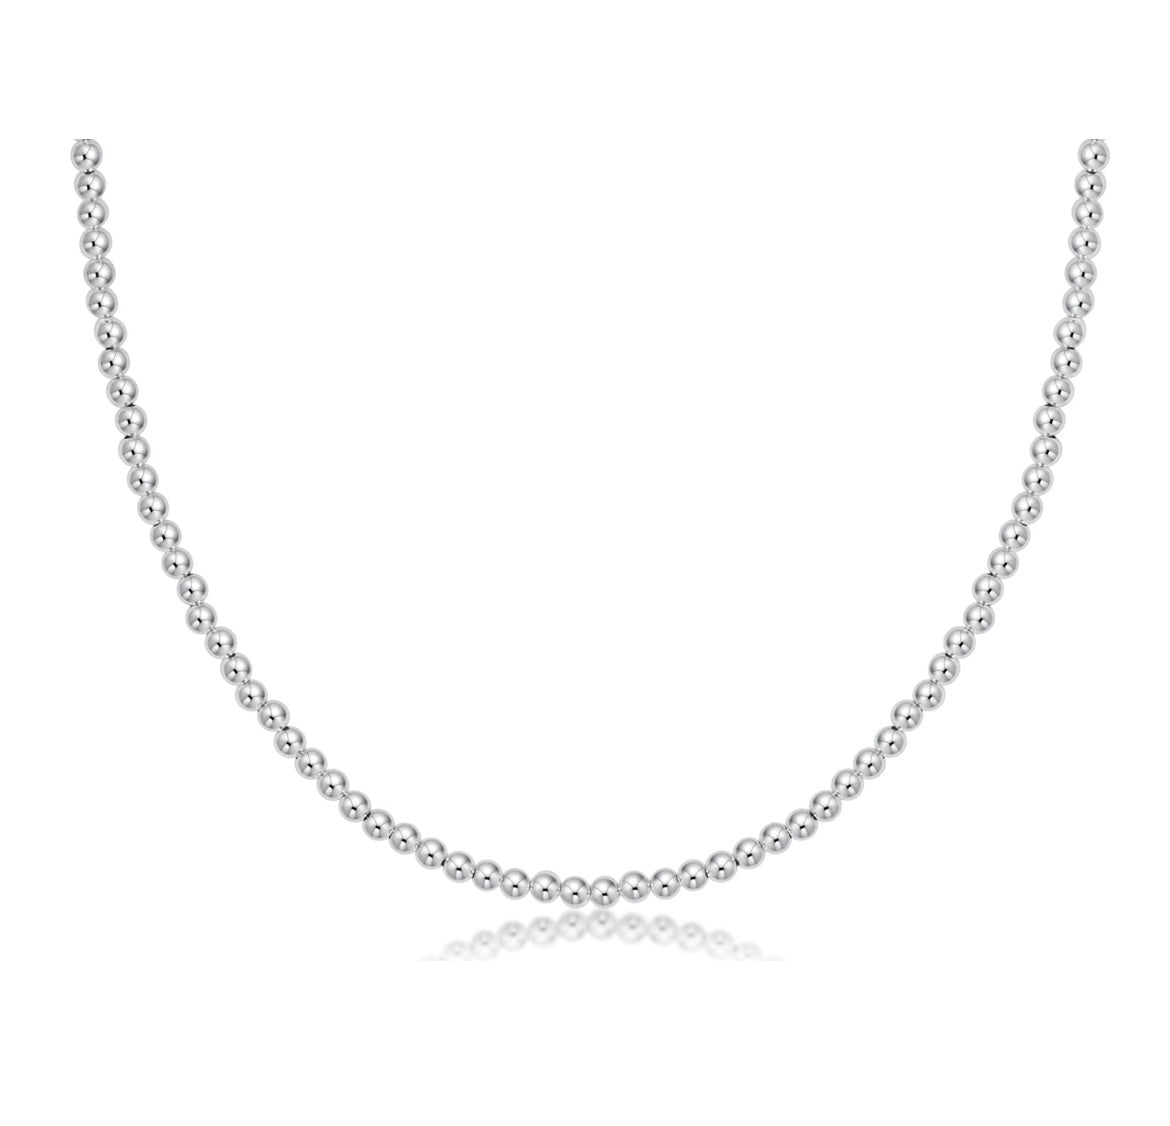 Bella Signature Sterling Silver Beaded Necklace